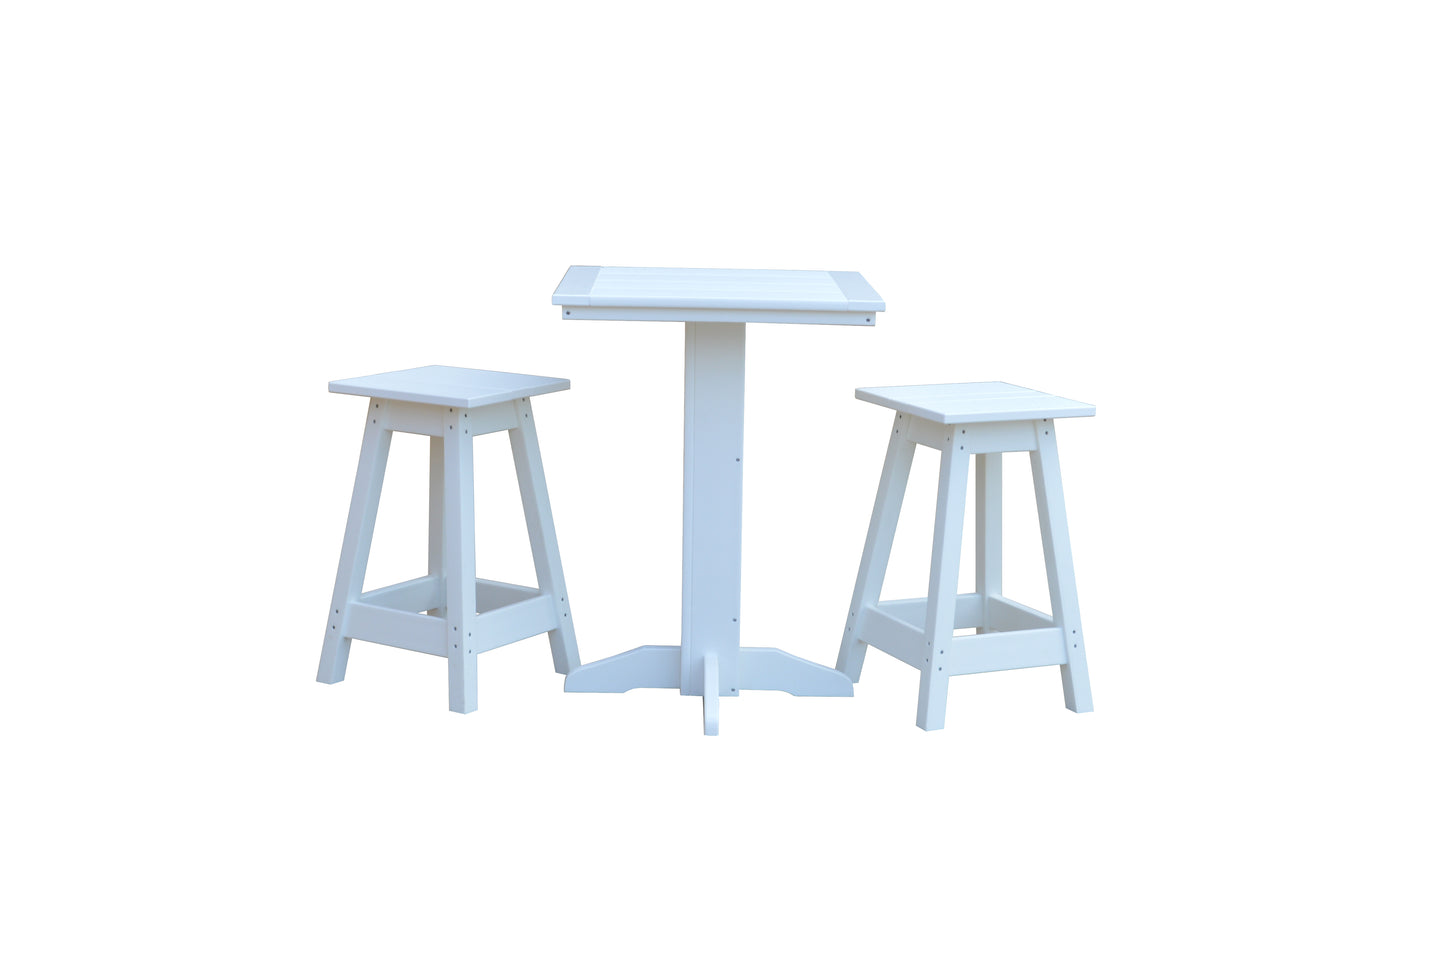 A&L Furniture Co. Recycled Plastic Square Bistro Stool Set - LEAD TIME TO SHIP 10 BUSINESS DAYS